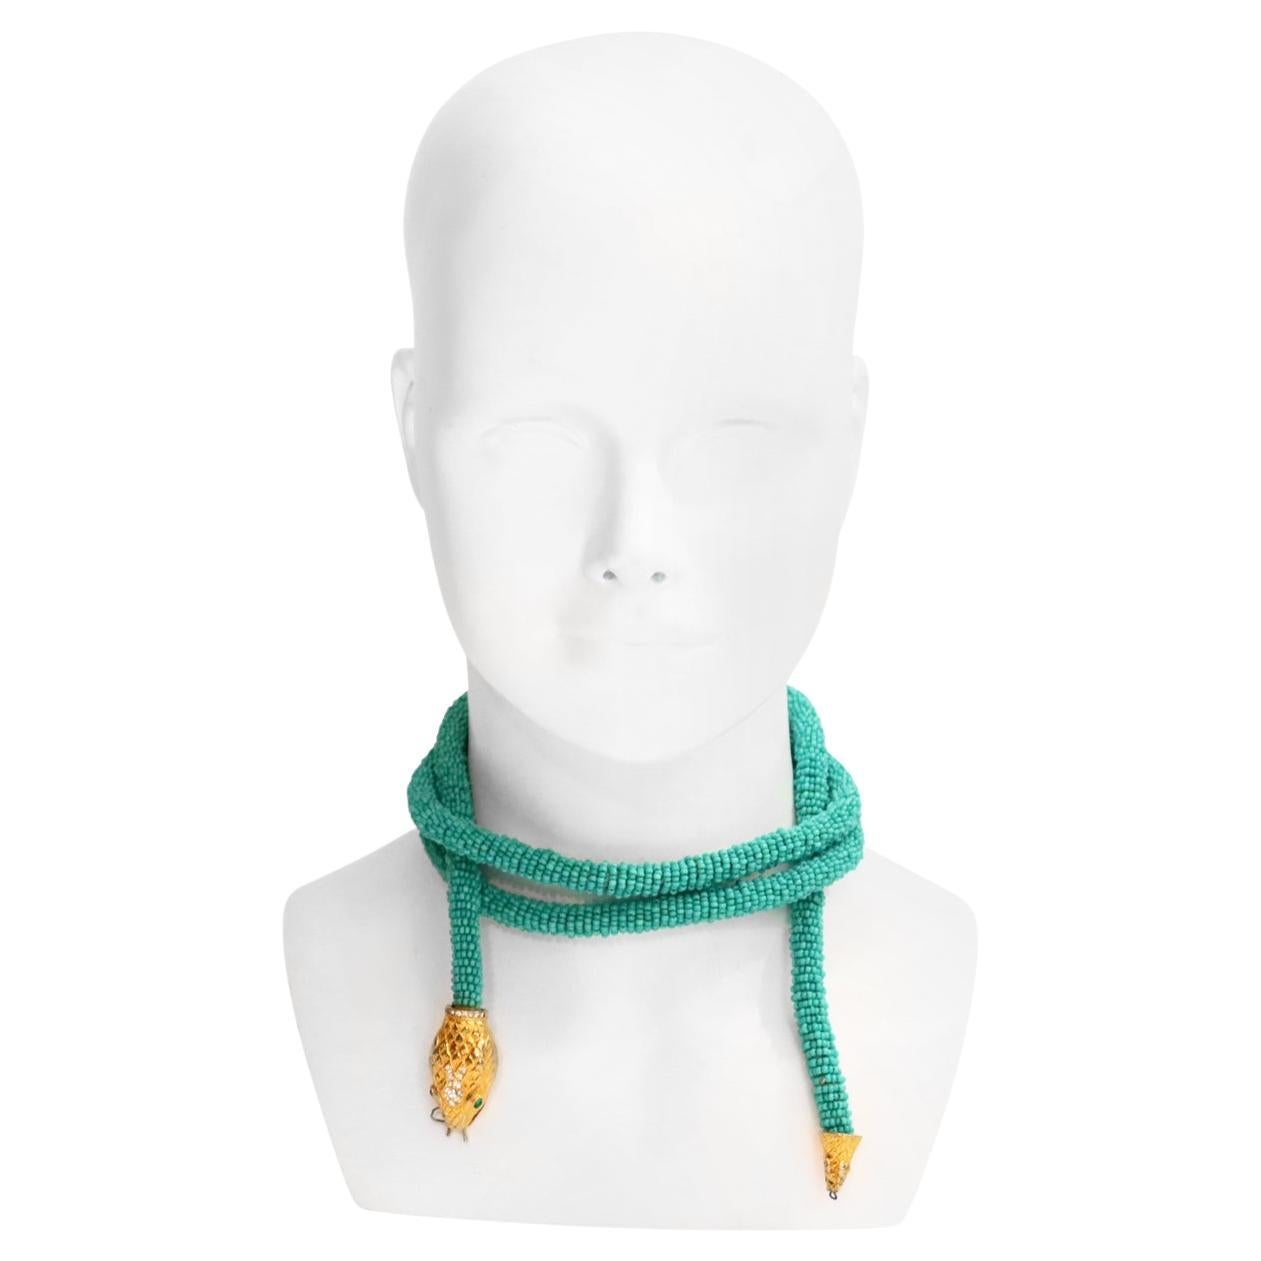 Vintage KJL Turquoise Color Beaded Snake Wrap Necklace Circa 1960s. The snake head and tail have diamante and green glass eyes.  The necklace lariat can be tied in many ways dependent on you.  This piece is not signed but I had its sister several